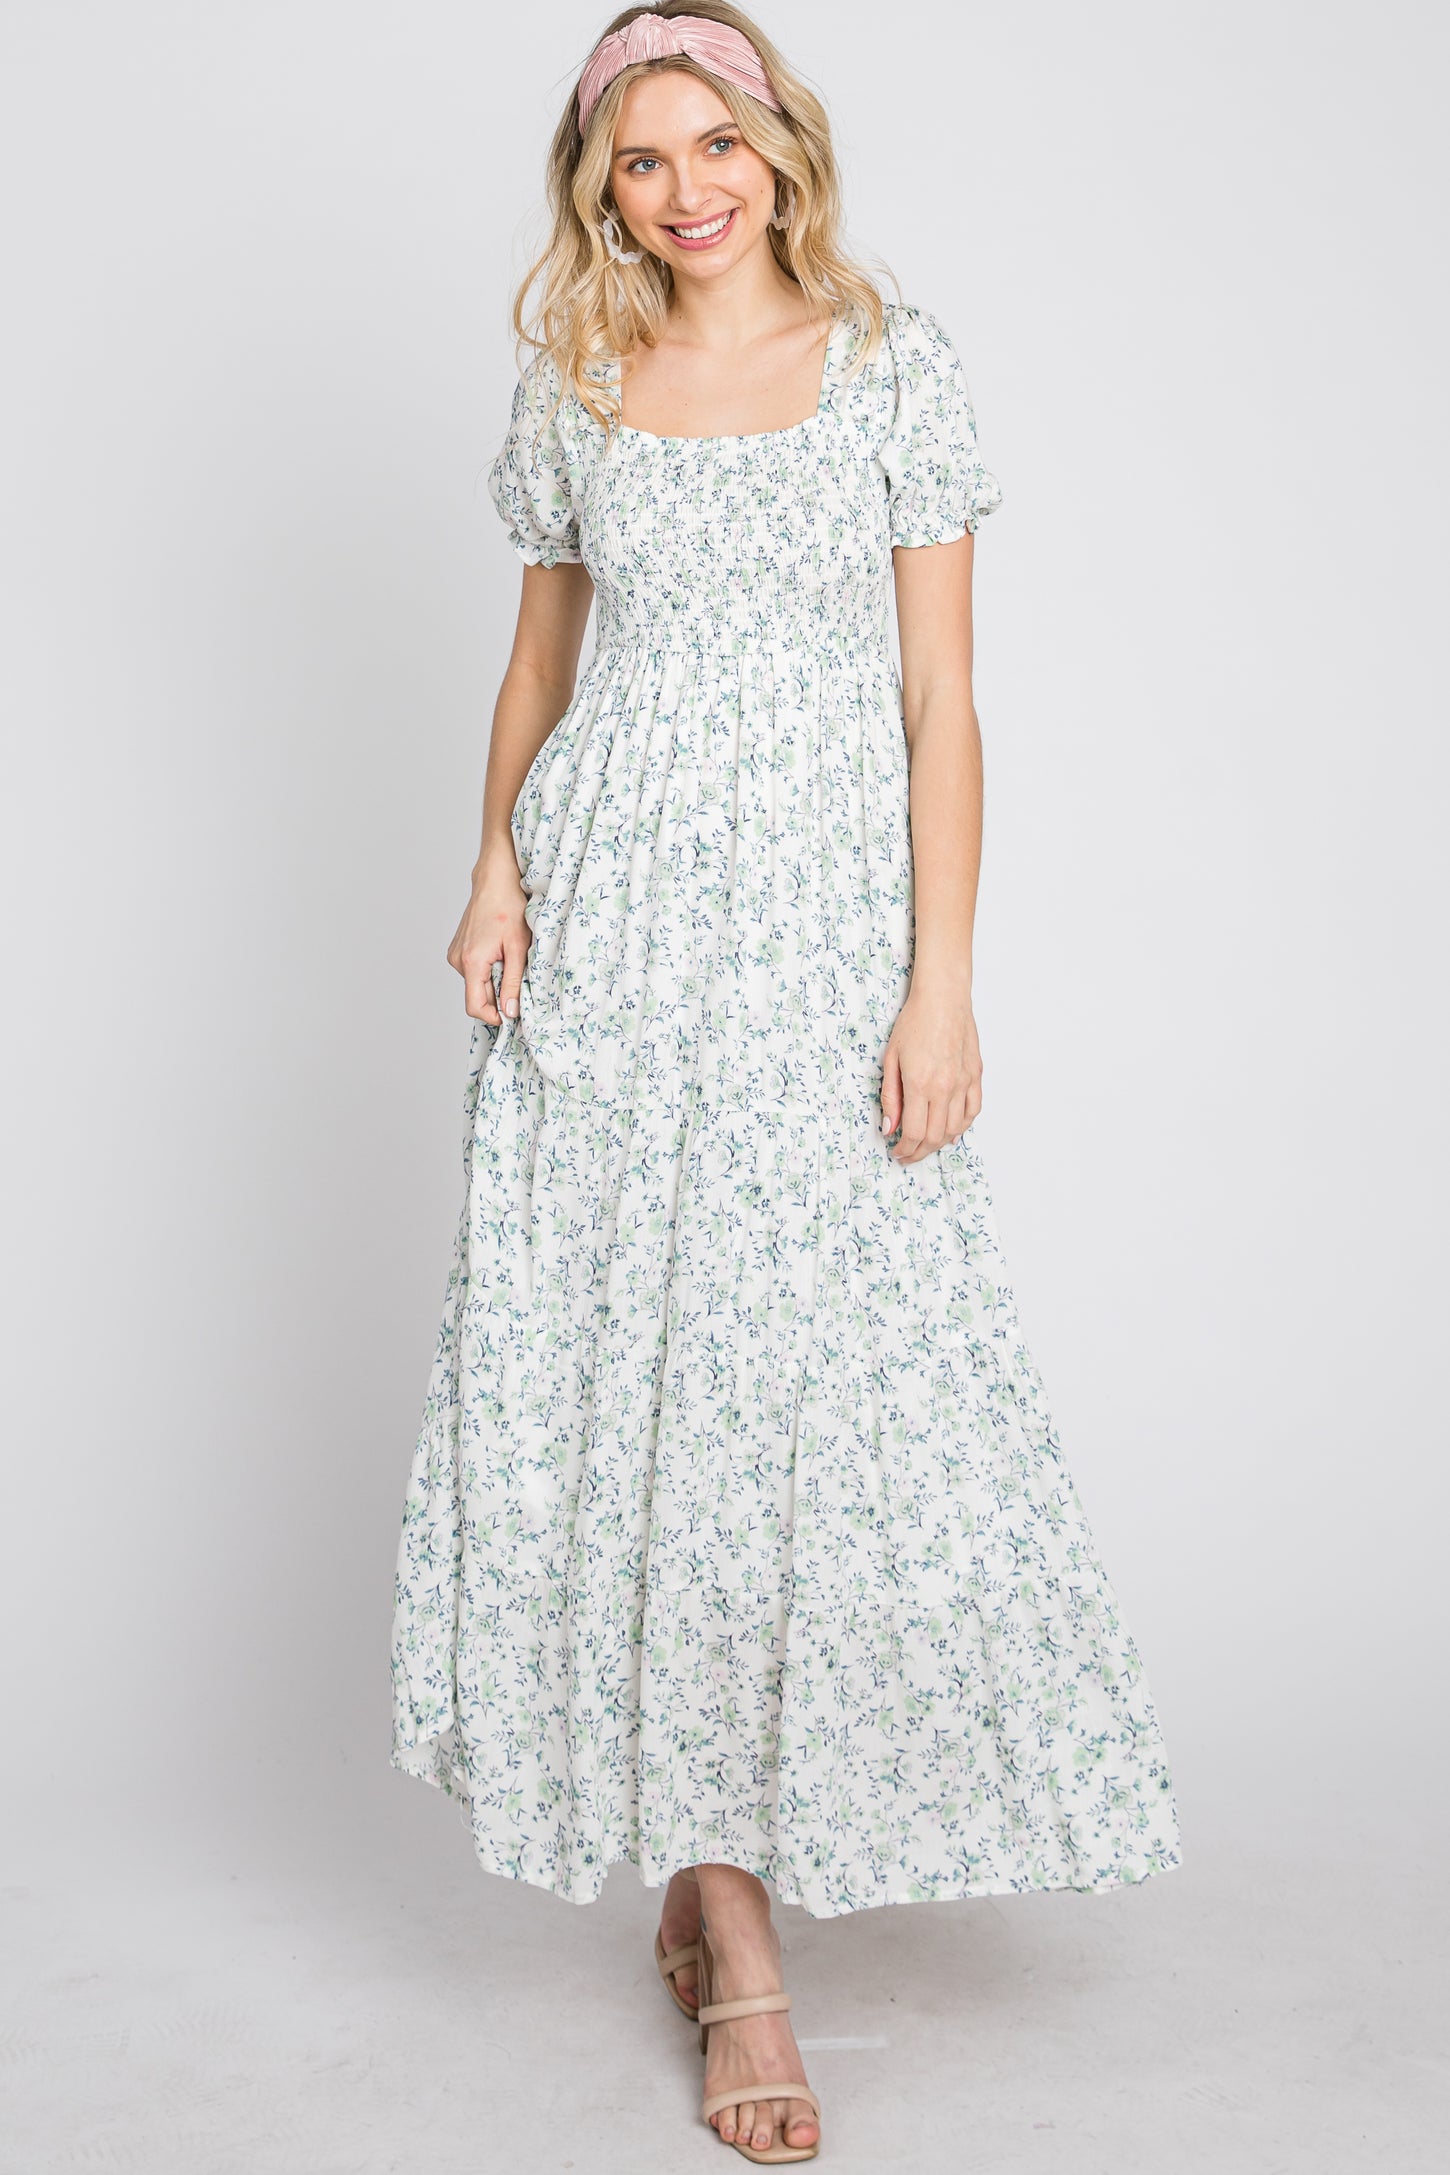 Ivory Floral Smocked Tiered Maternity Maxi Dress– PinkBlush